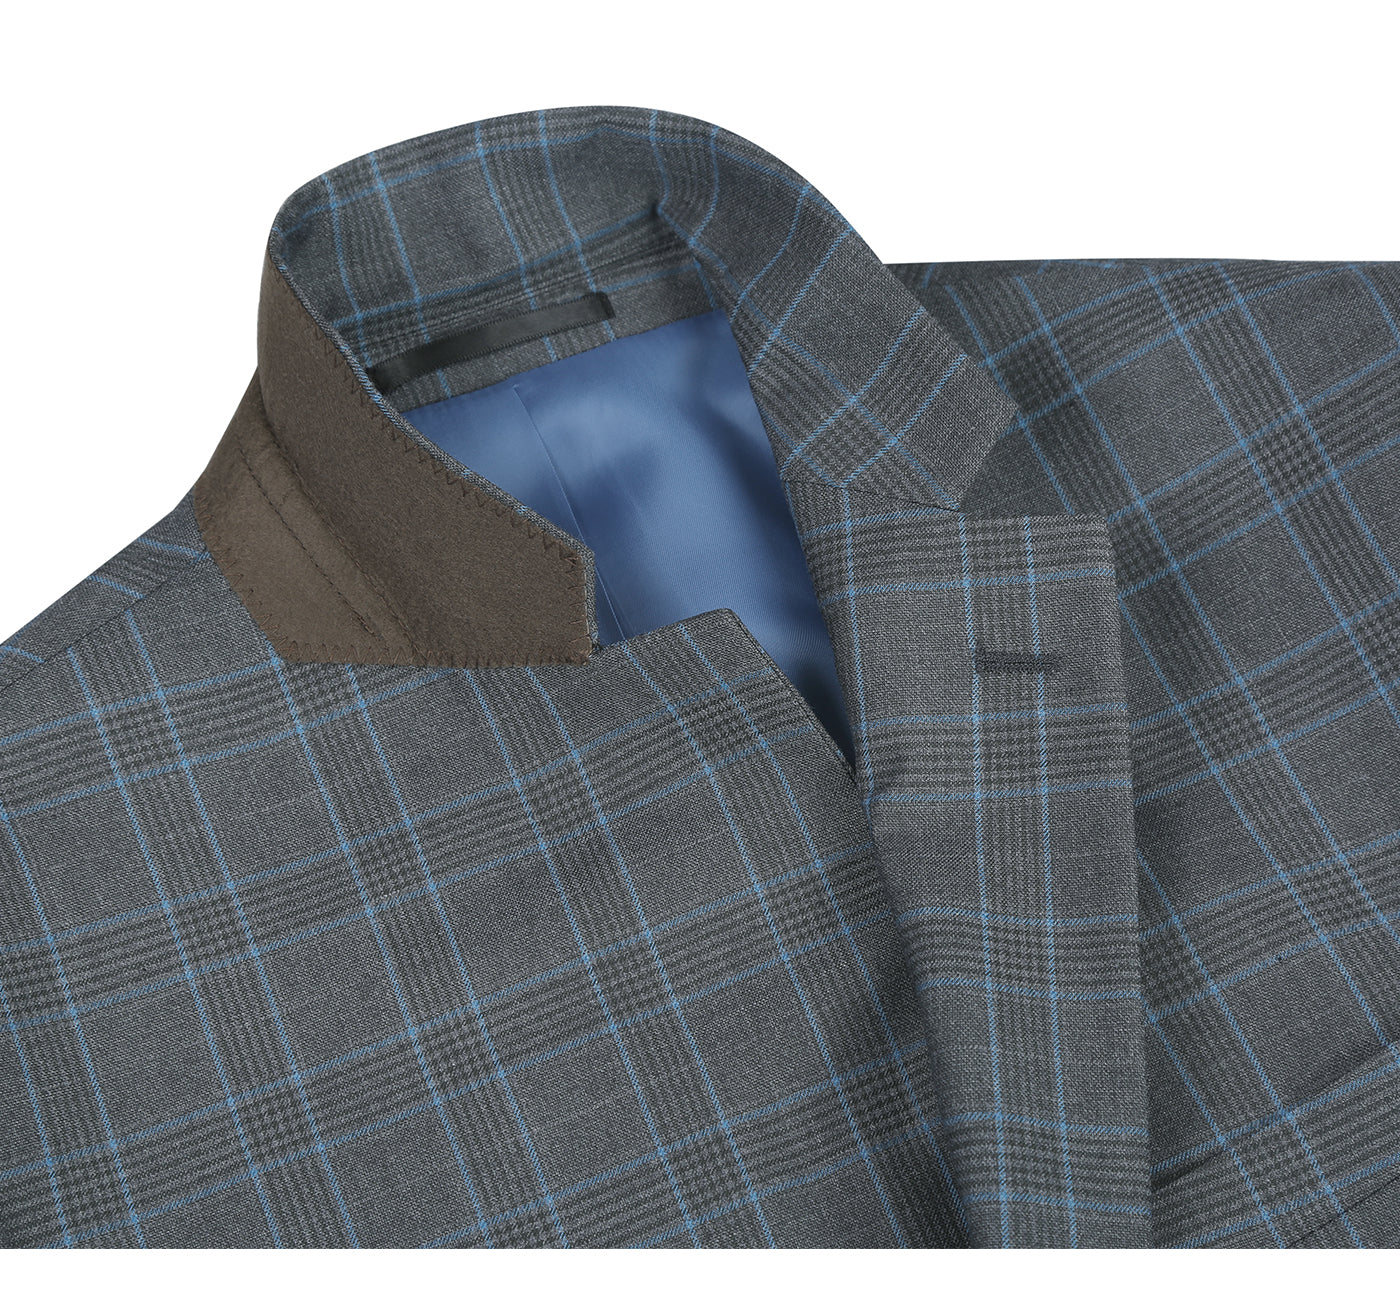 Stretch Performance 2-Button CLASSIC FIT Suit in Grey and Blue Check (Short, Regular, and Long Available) by Renoir